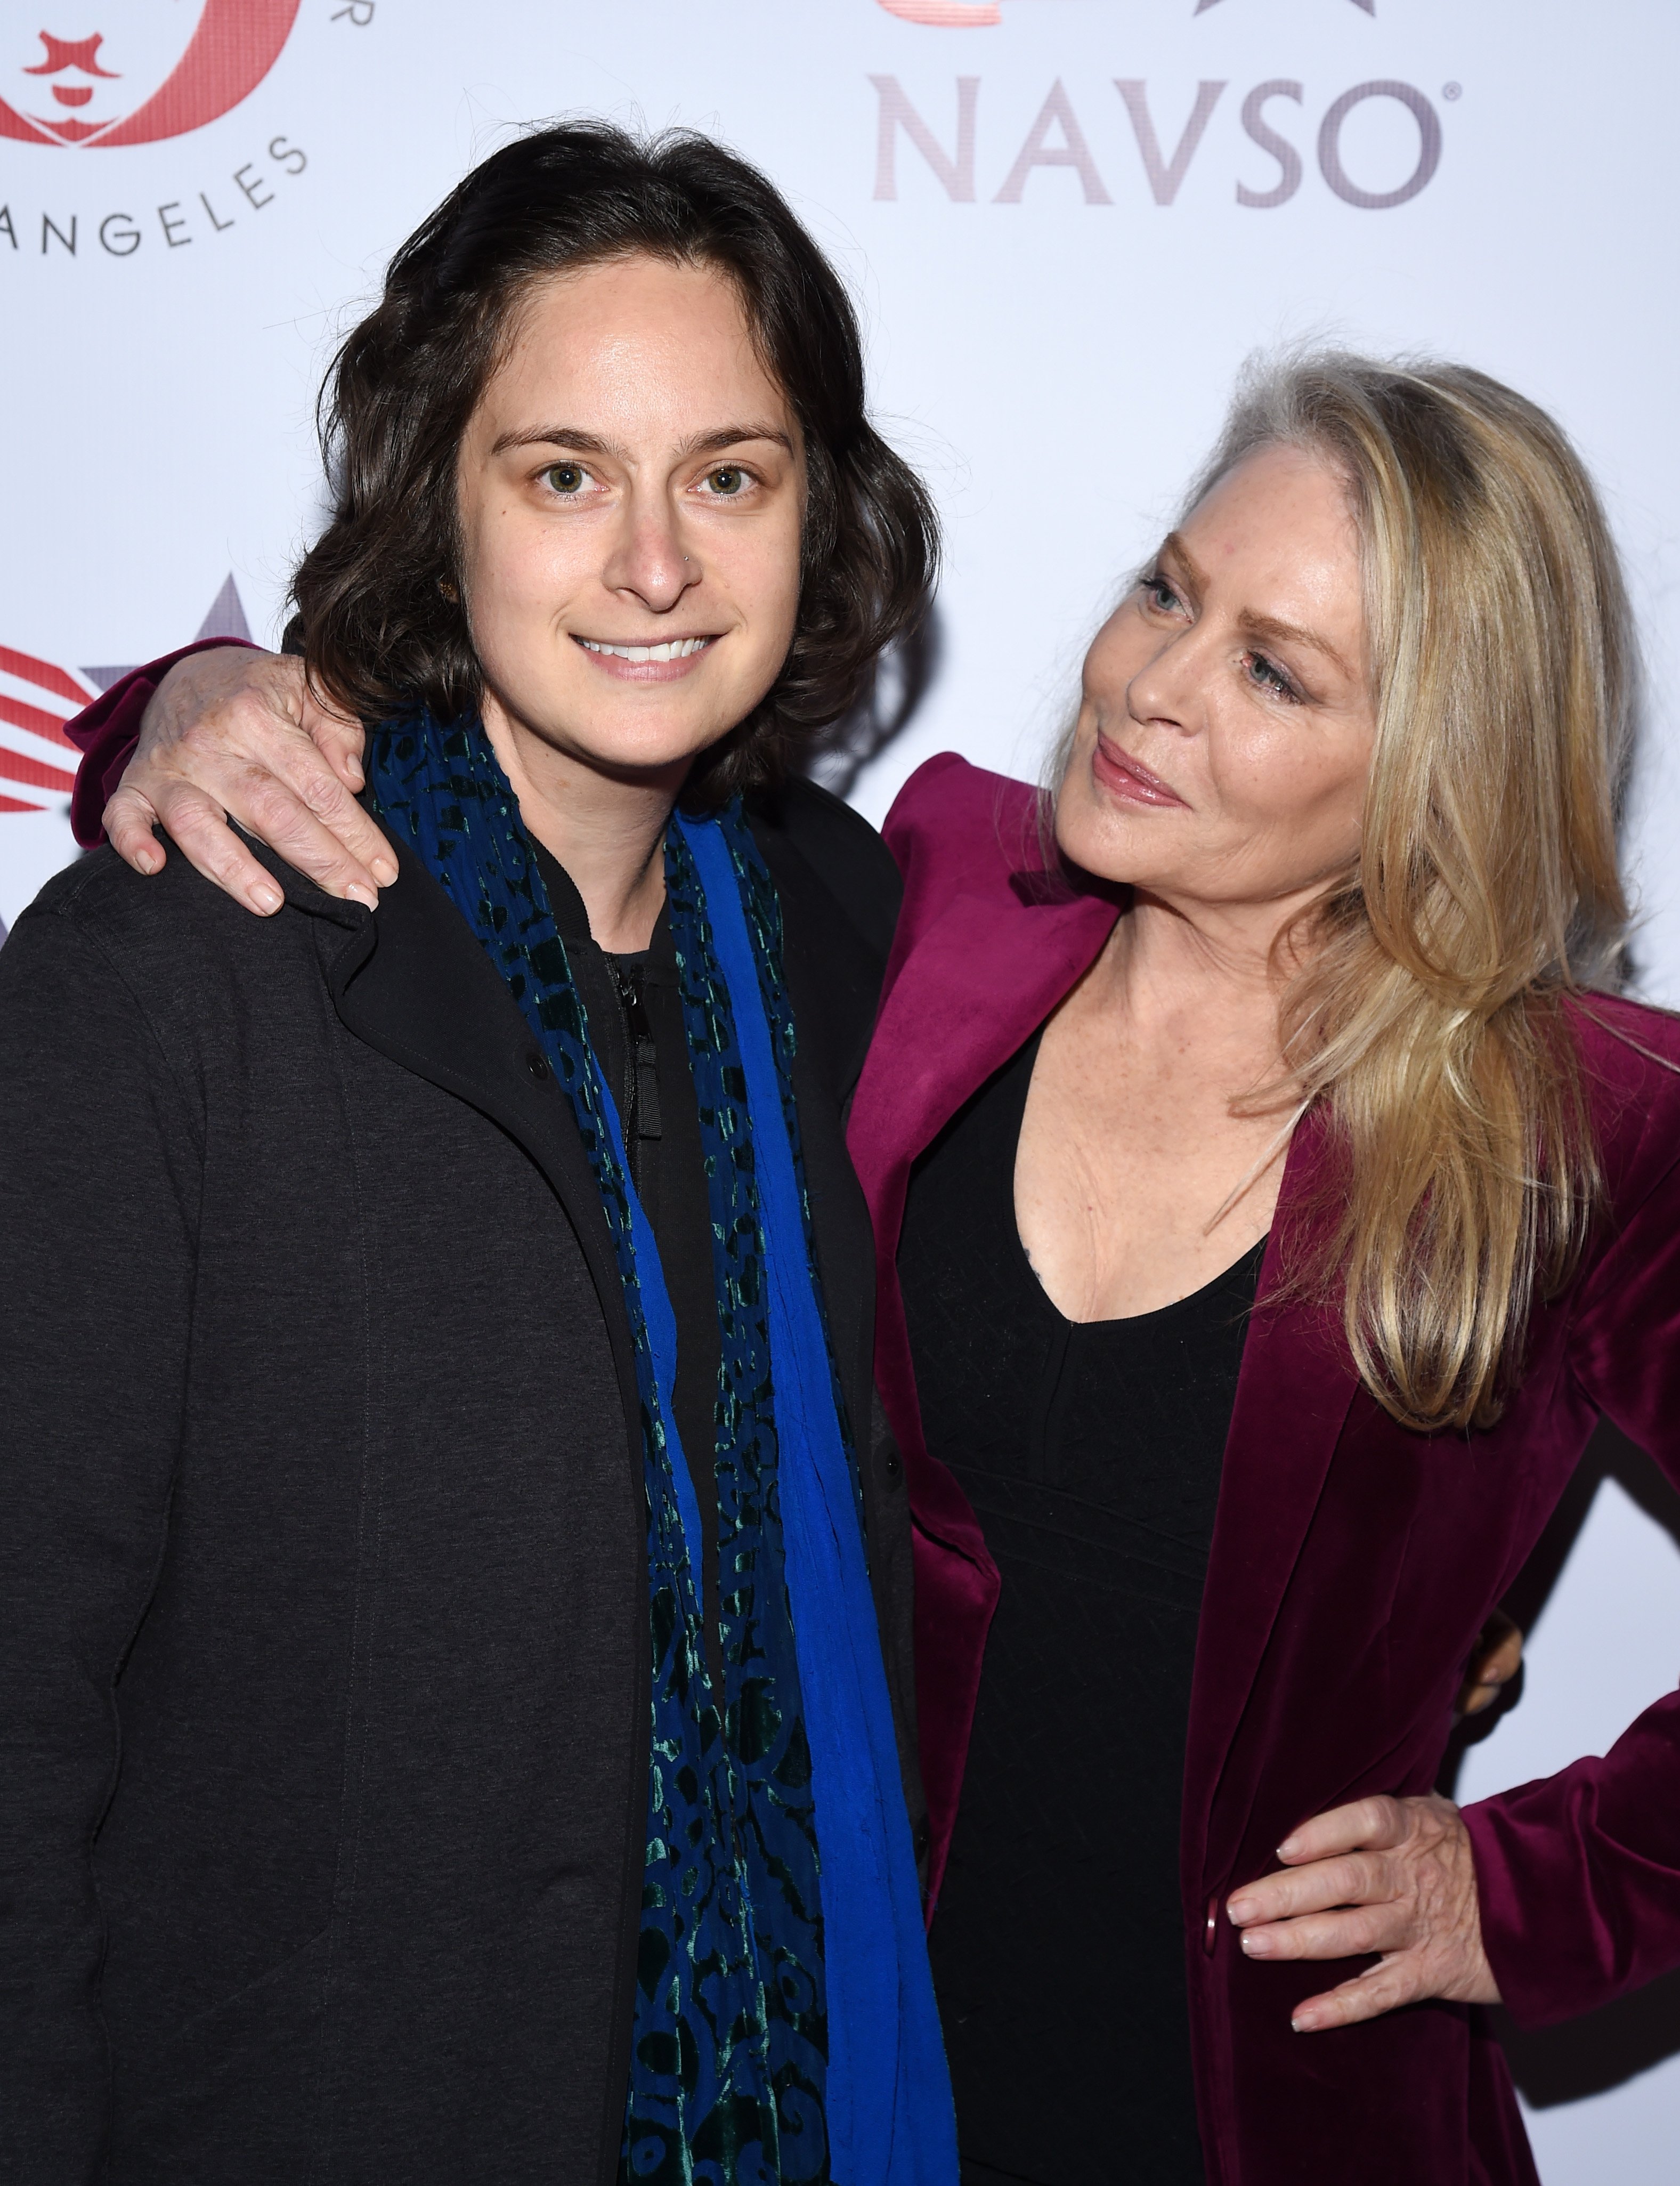 Producer and director Julie Pacino and actress Beverly D'Angelo at the VIP post show reception at Via Porto on March 08, 2020 | Photo: Getty Images